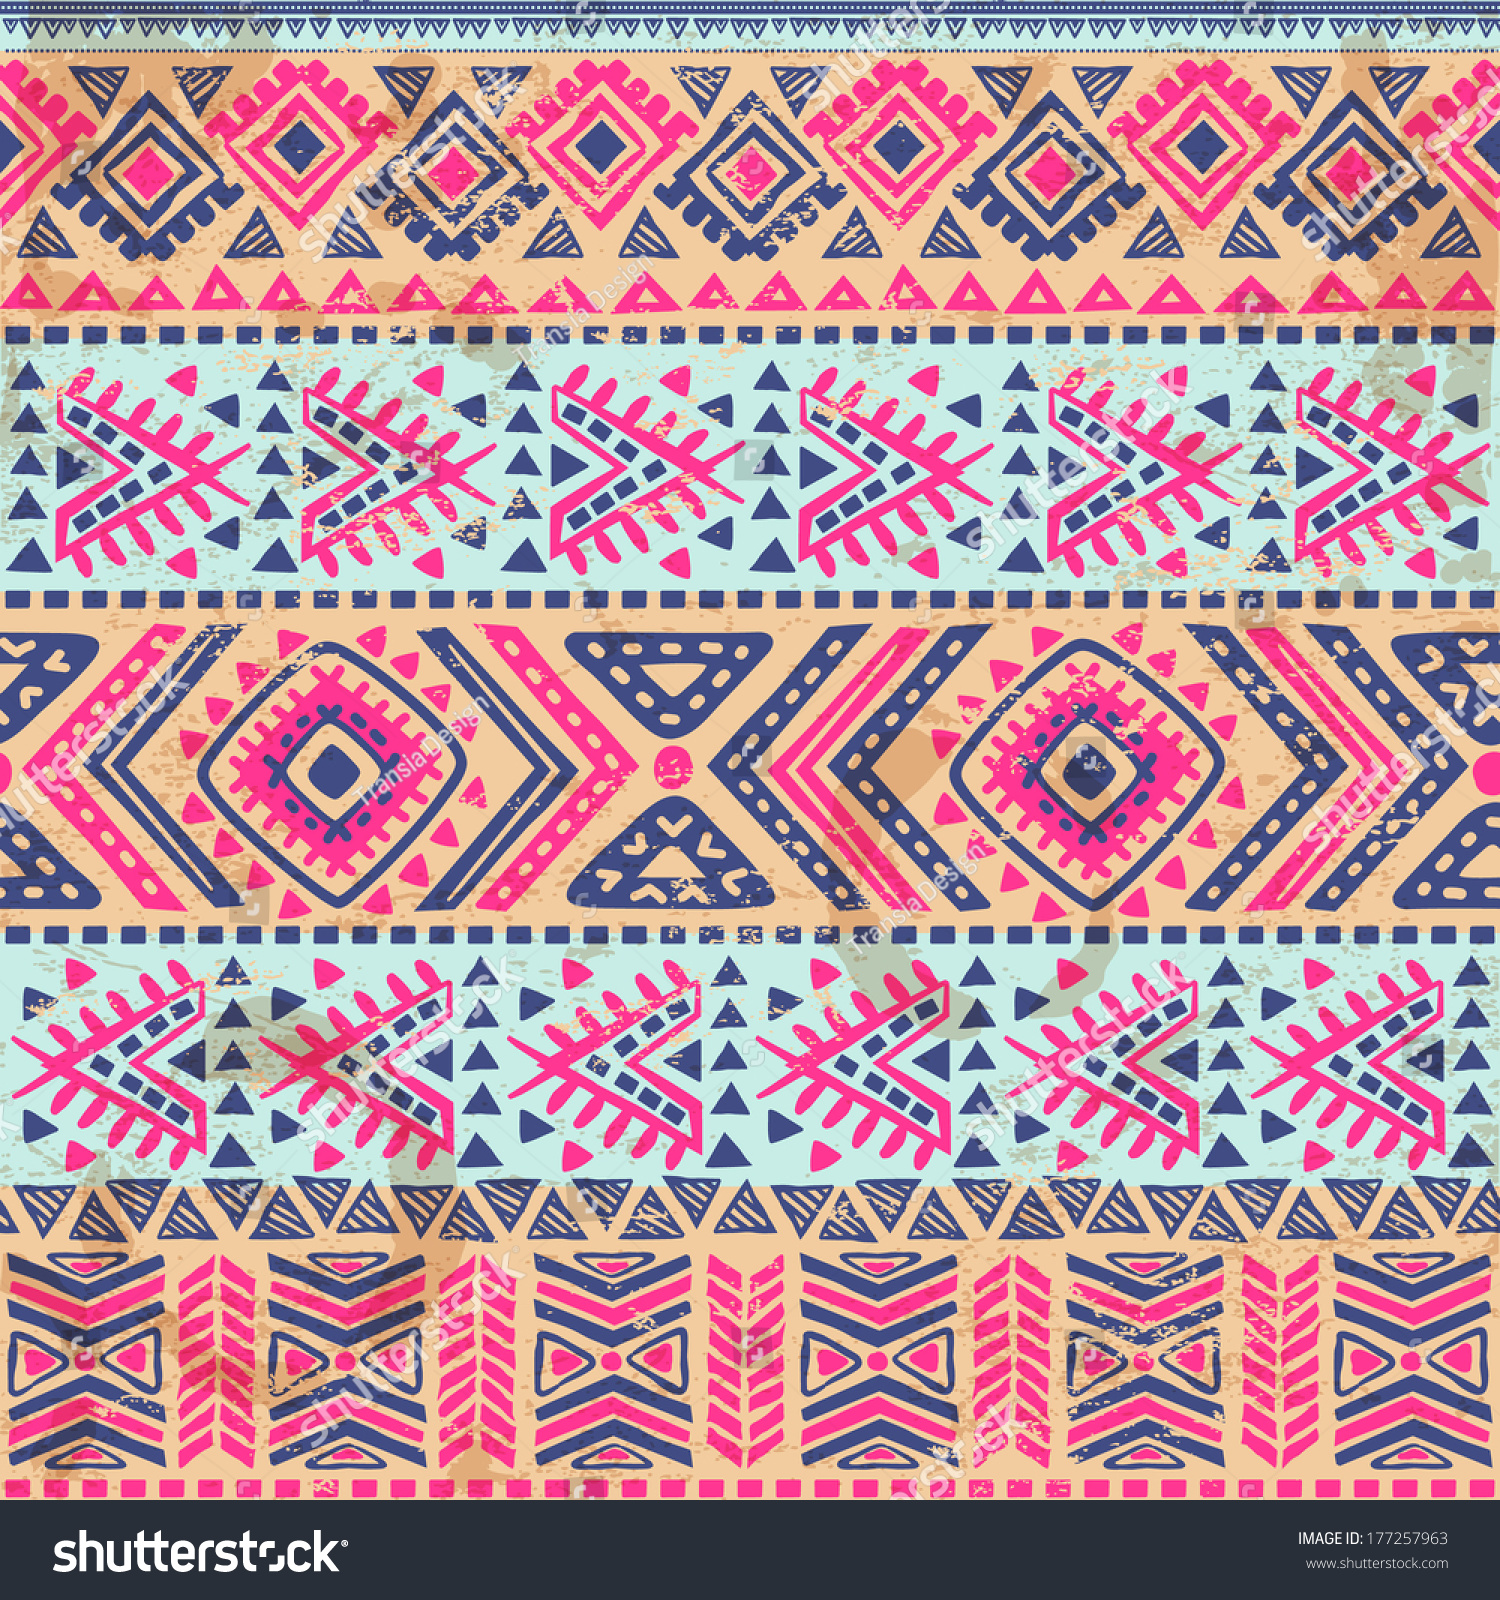 Tribal Vintage Ethnic Seamless Your Business Stock Vector (Royalty Free ...